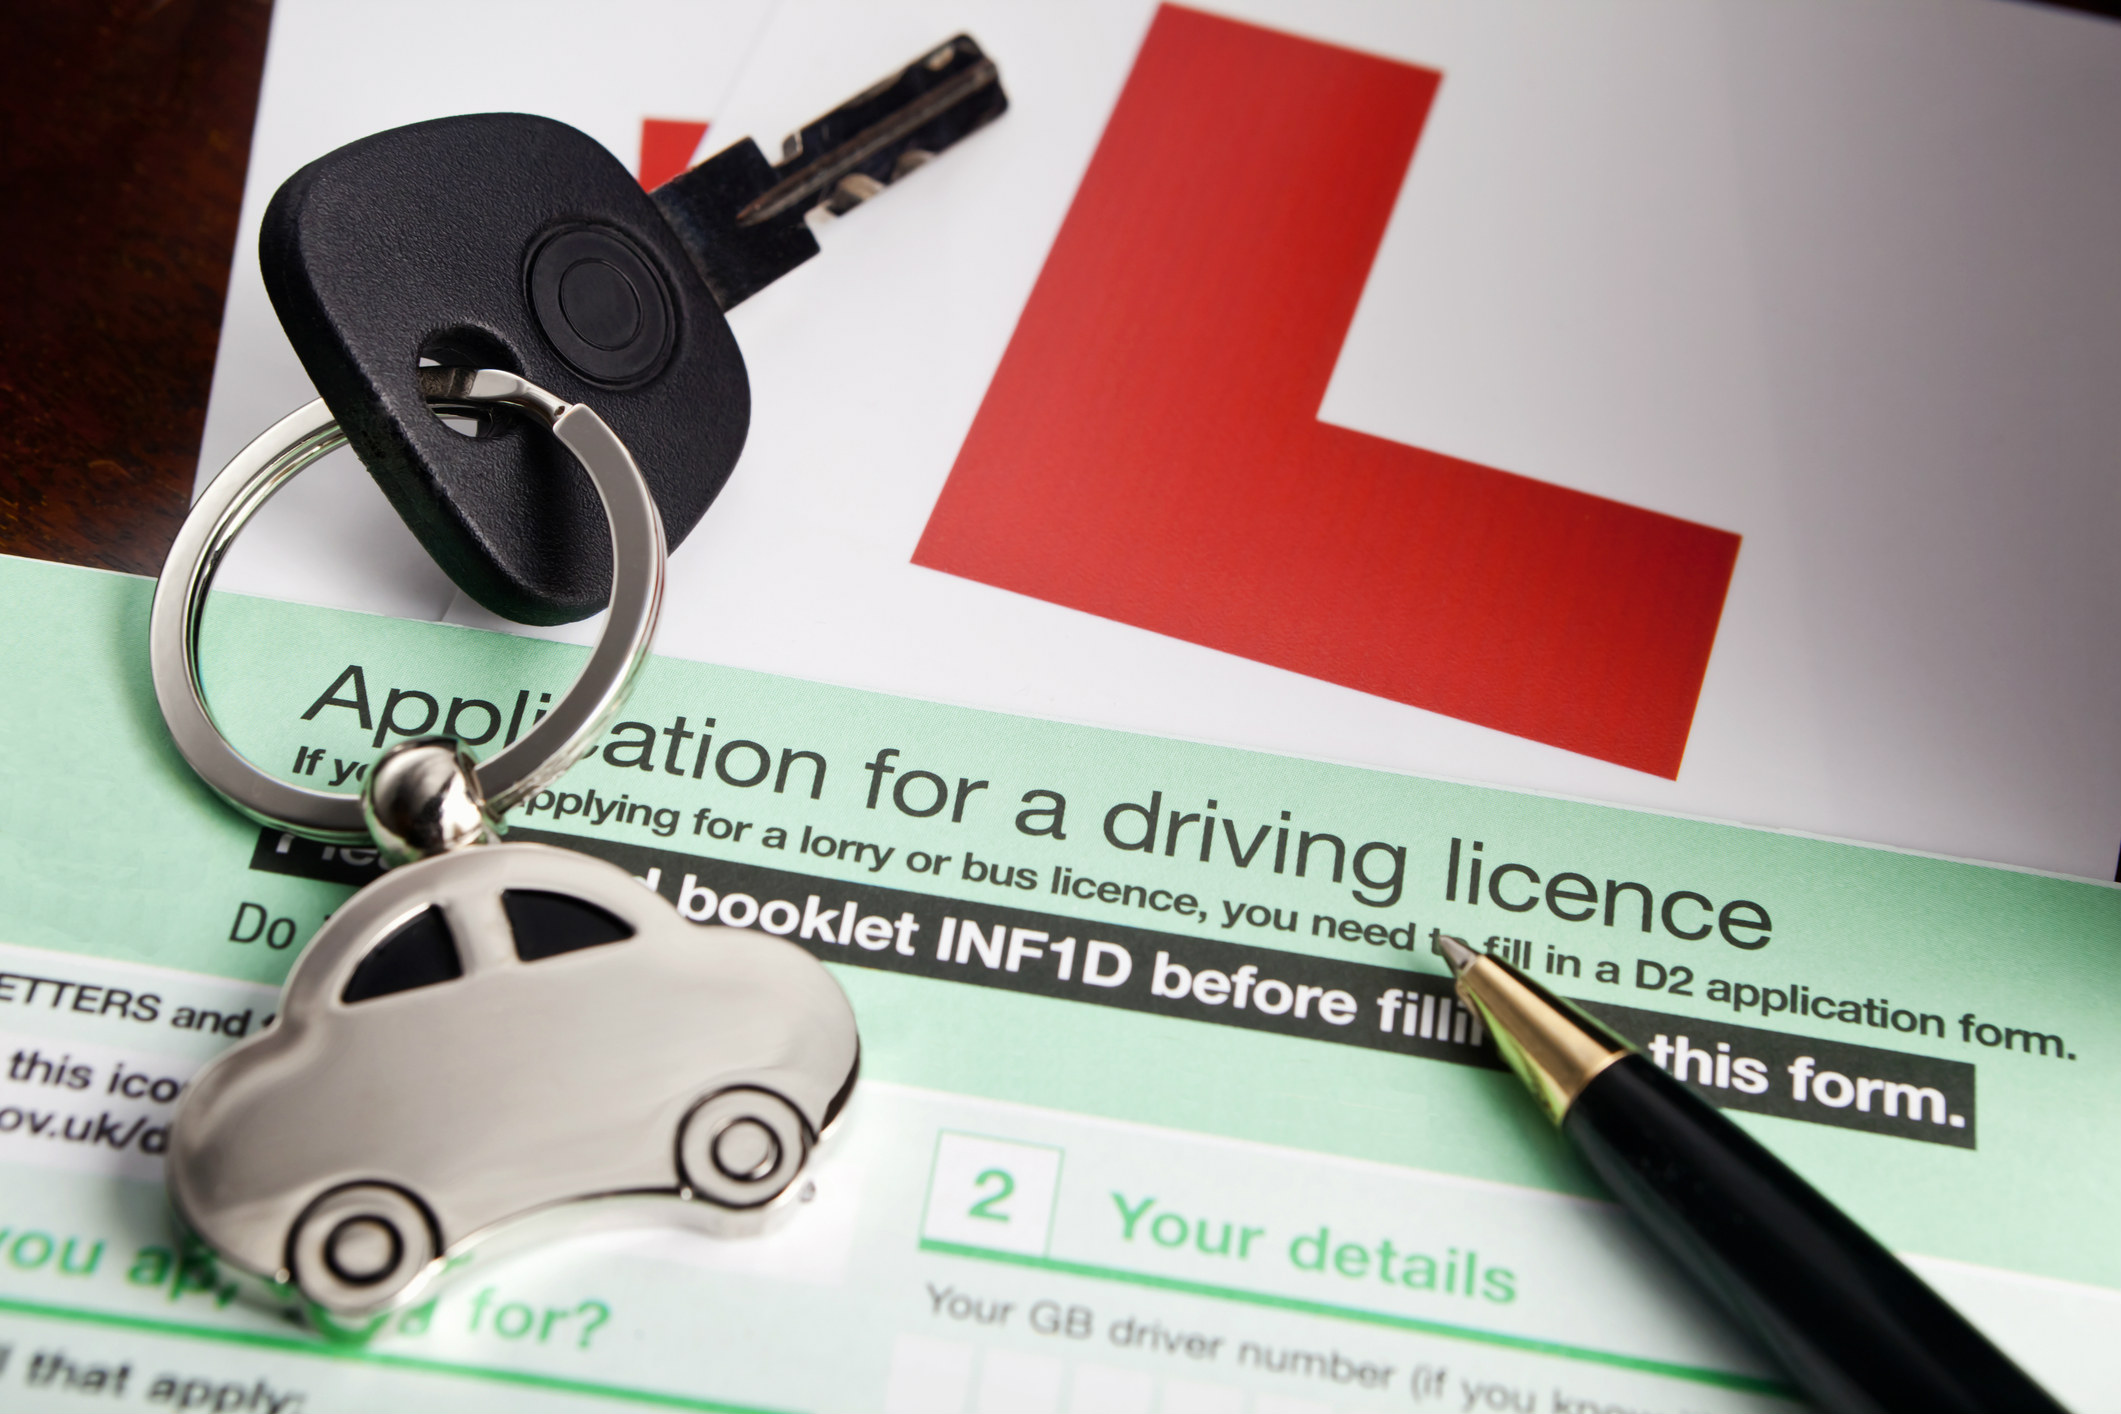 Where to take your driving test if you want to pass first time